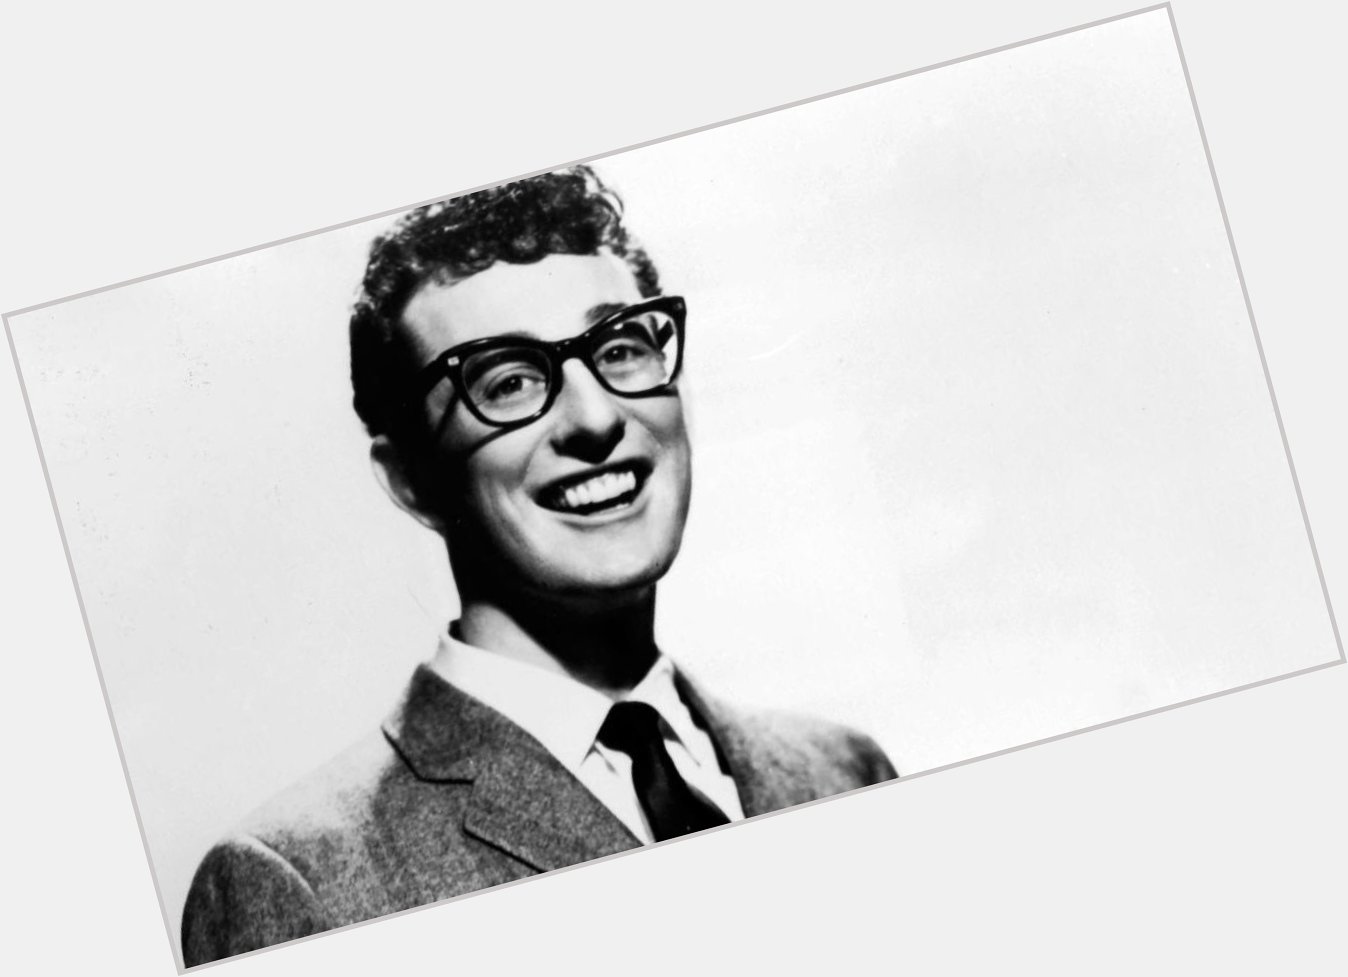 HAPPY BIRTHDAY TO THE MUSICAL LEGEND BUDDY HOLLY 